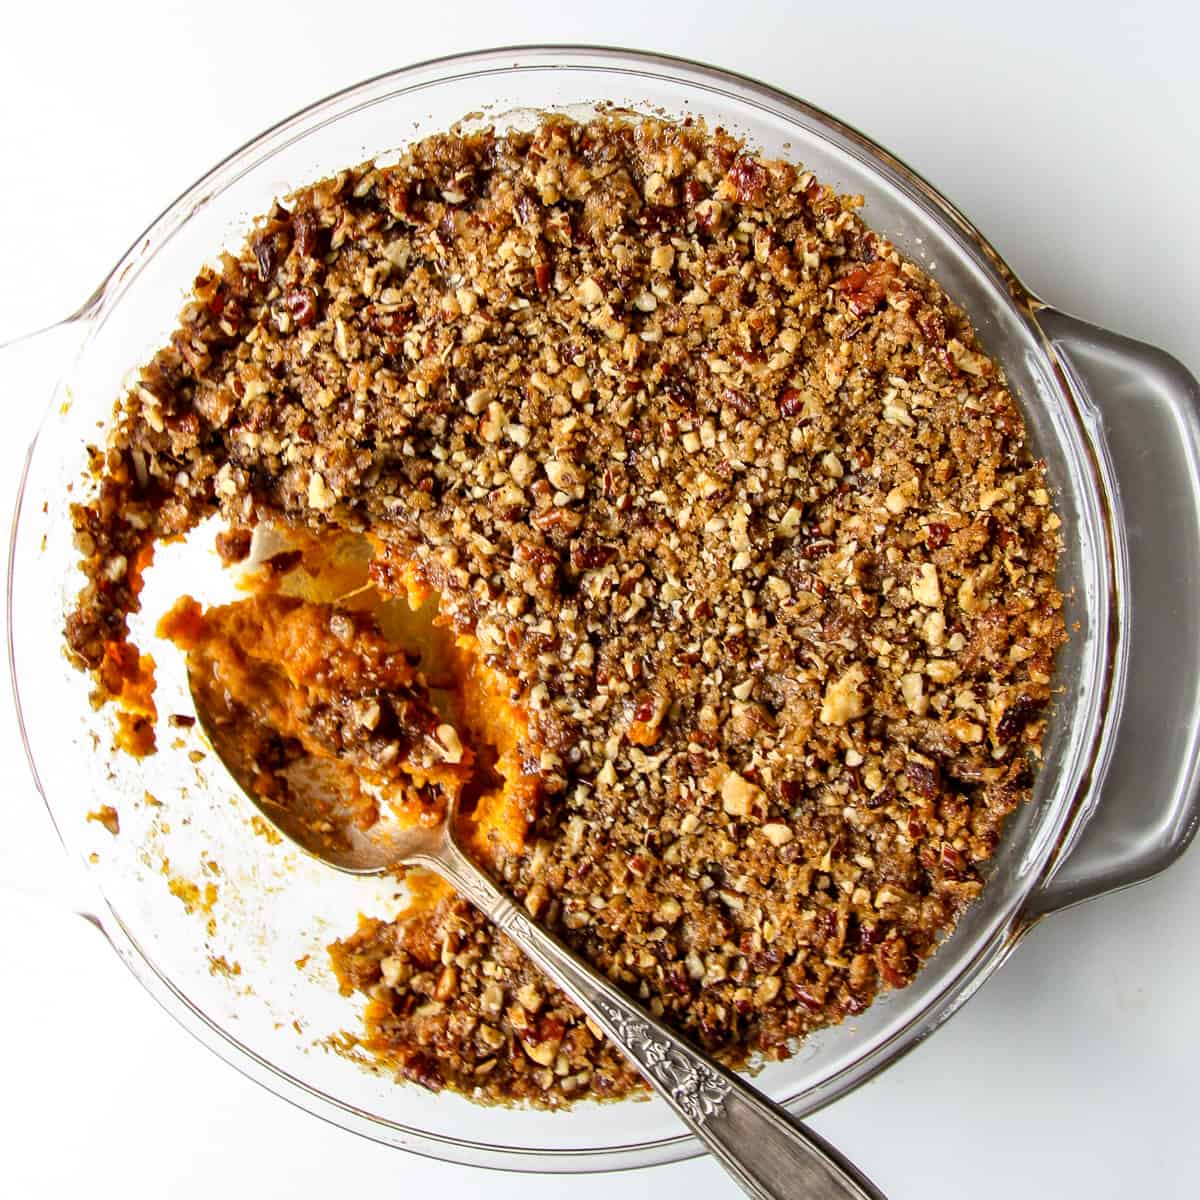 A serving spoonful of sweet potato crunch being taken from a casserole dish.